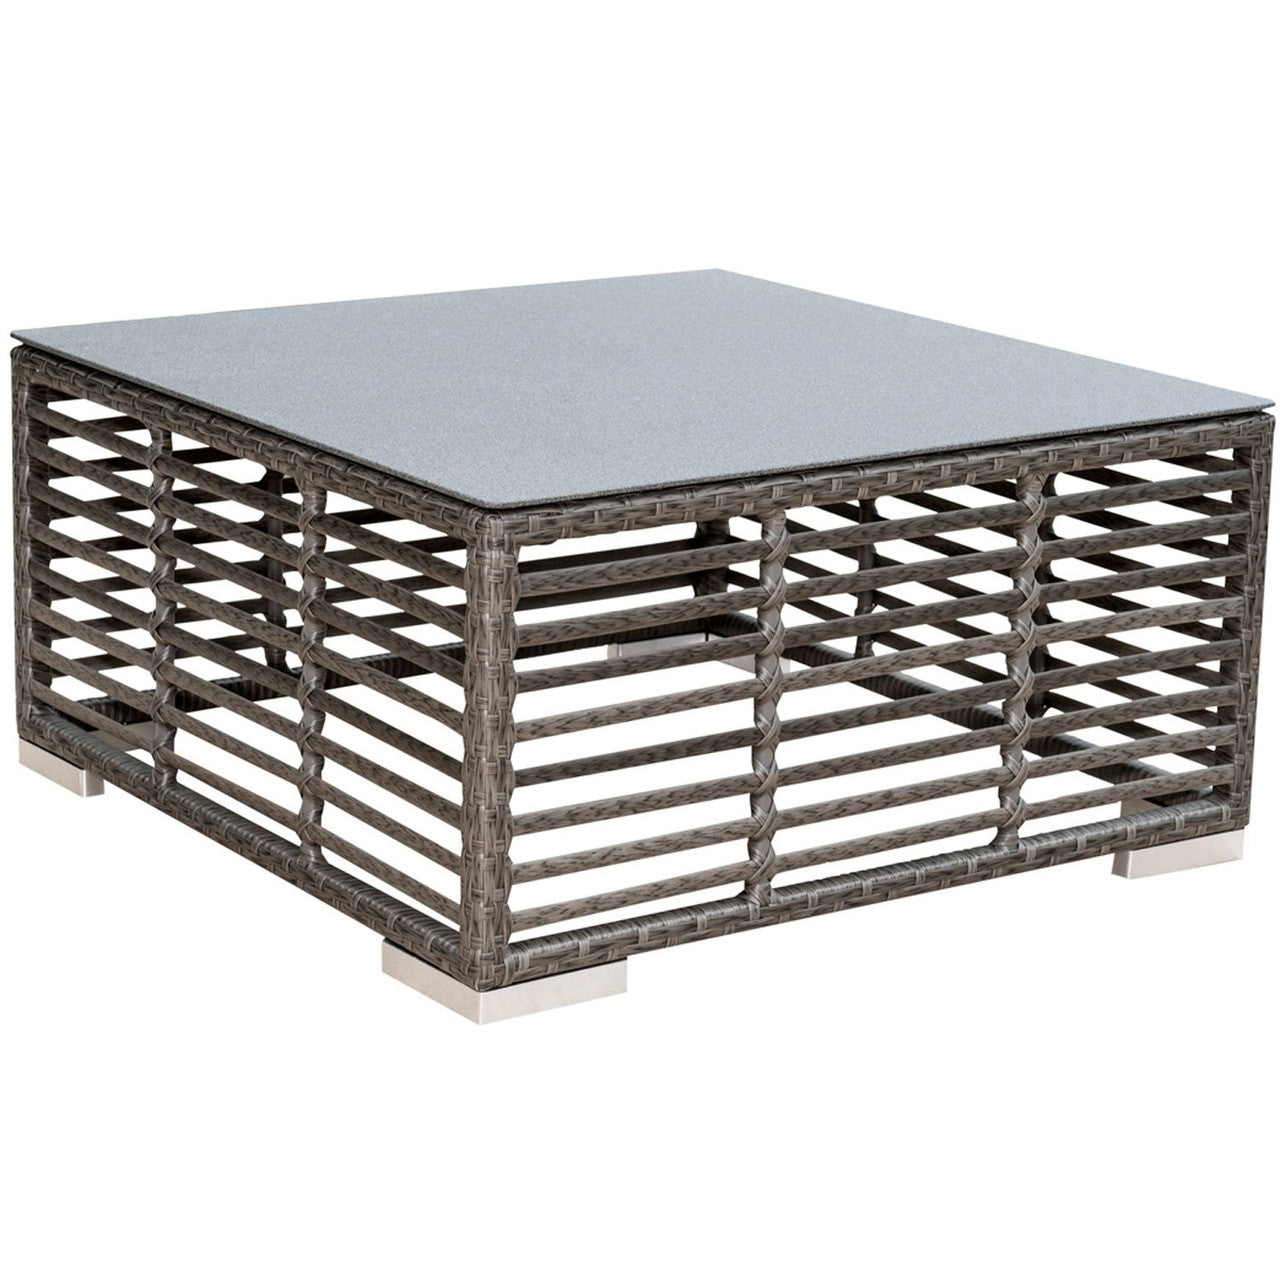 Panama Jack Graphite Square Coffee Table with Glass